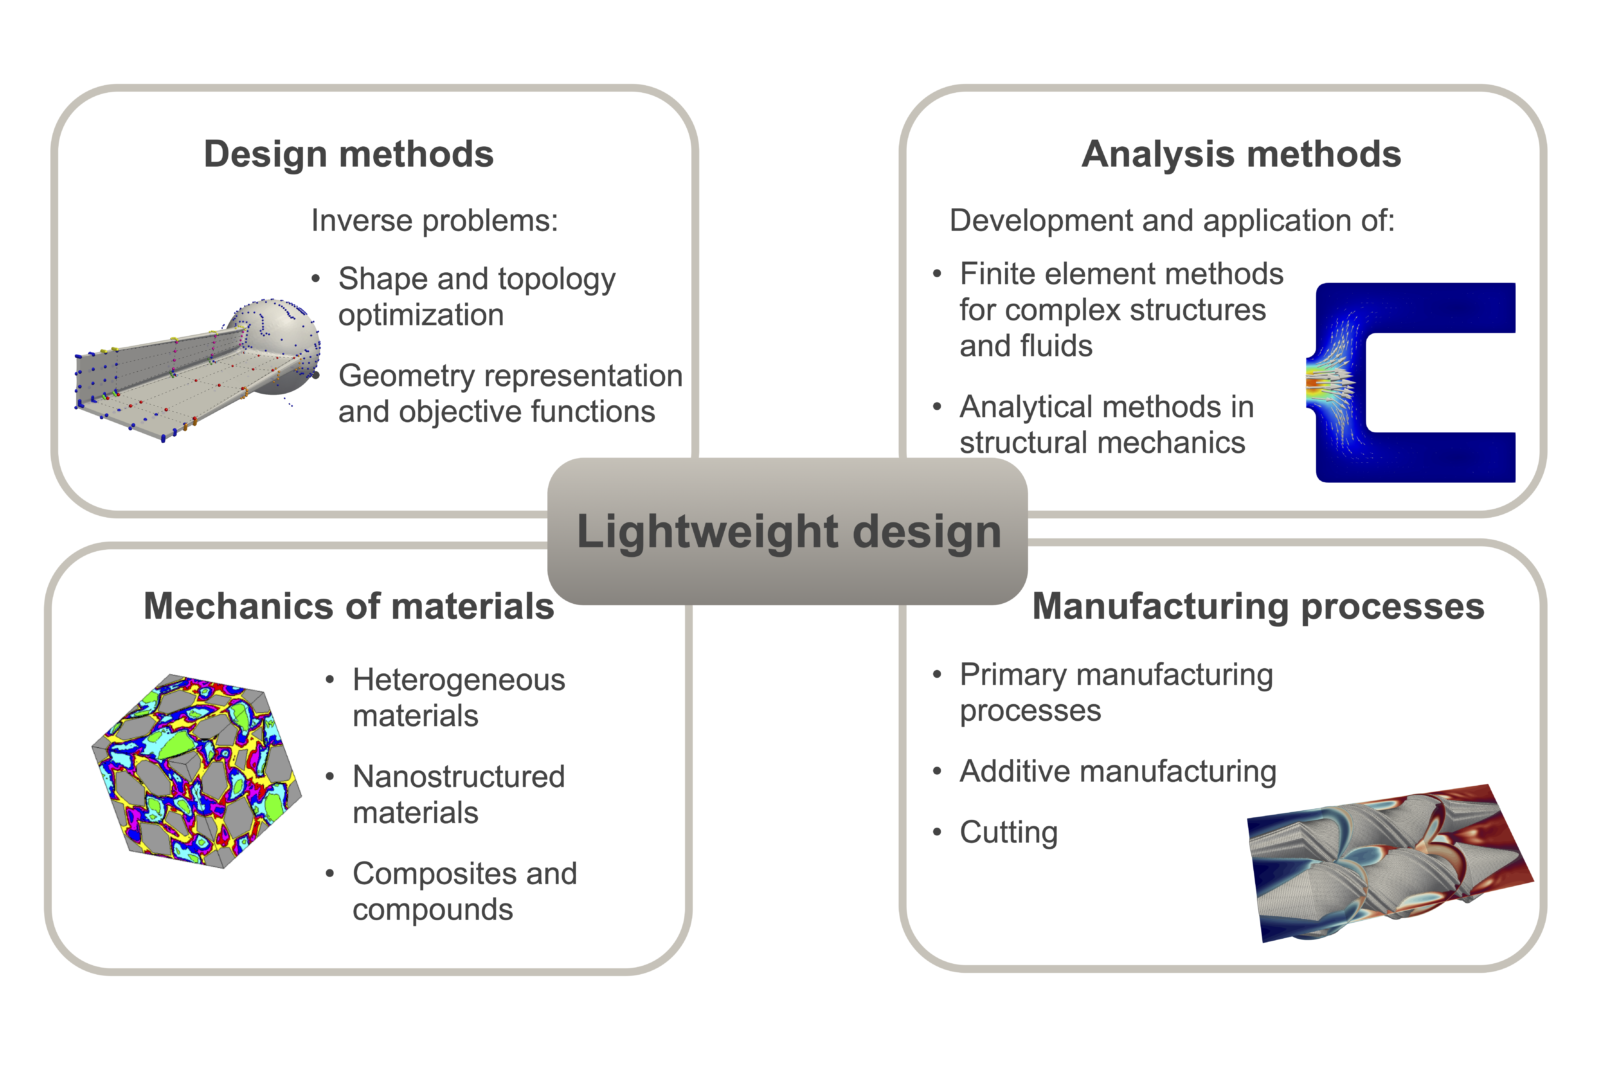 Overview of the four major subject areas with which the research group Lightweight Design is concerned.